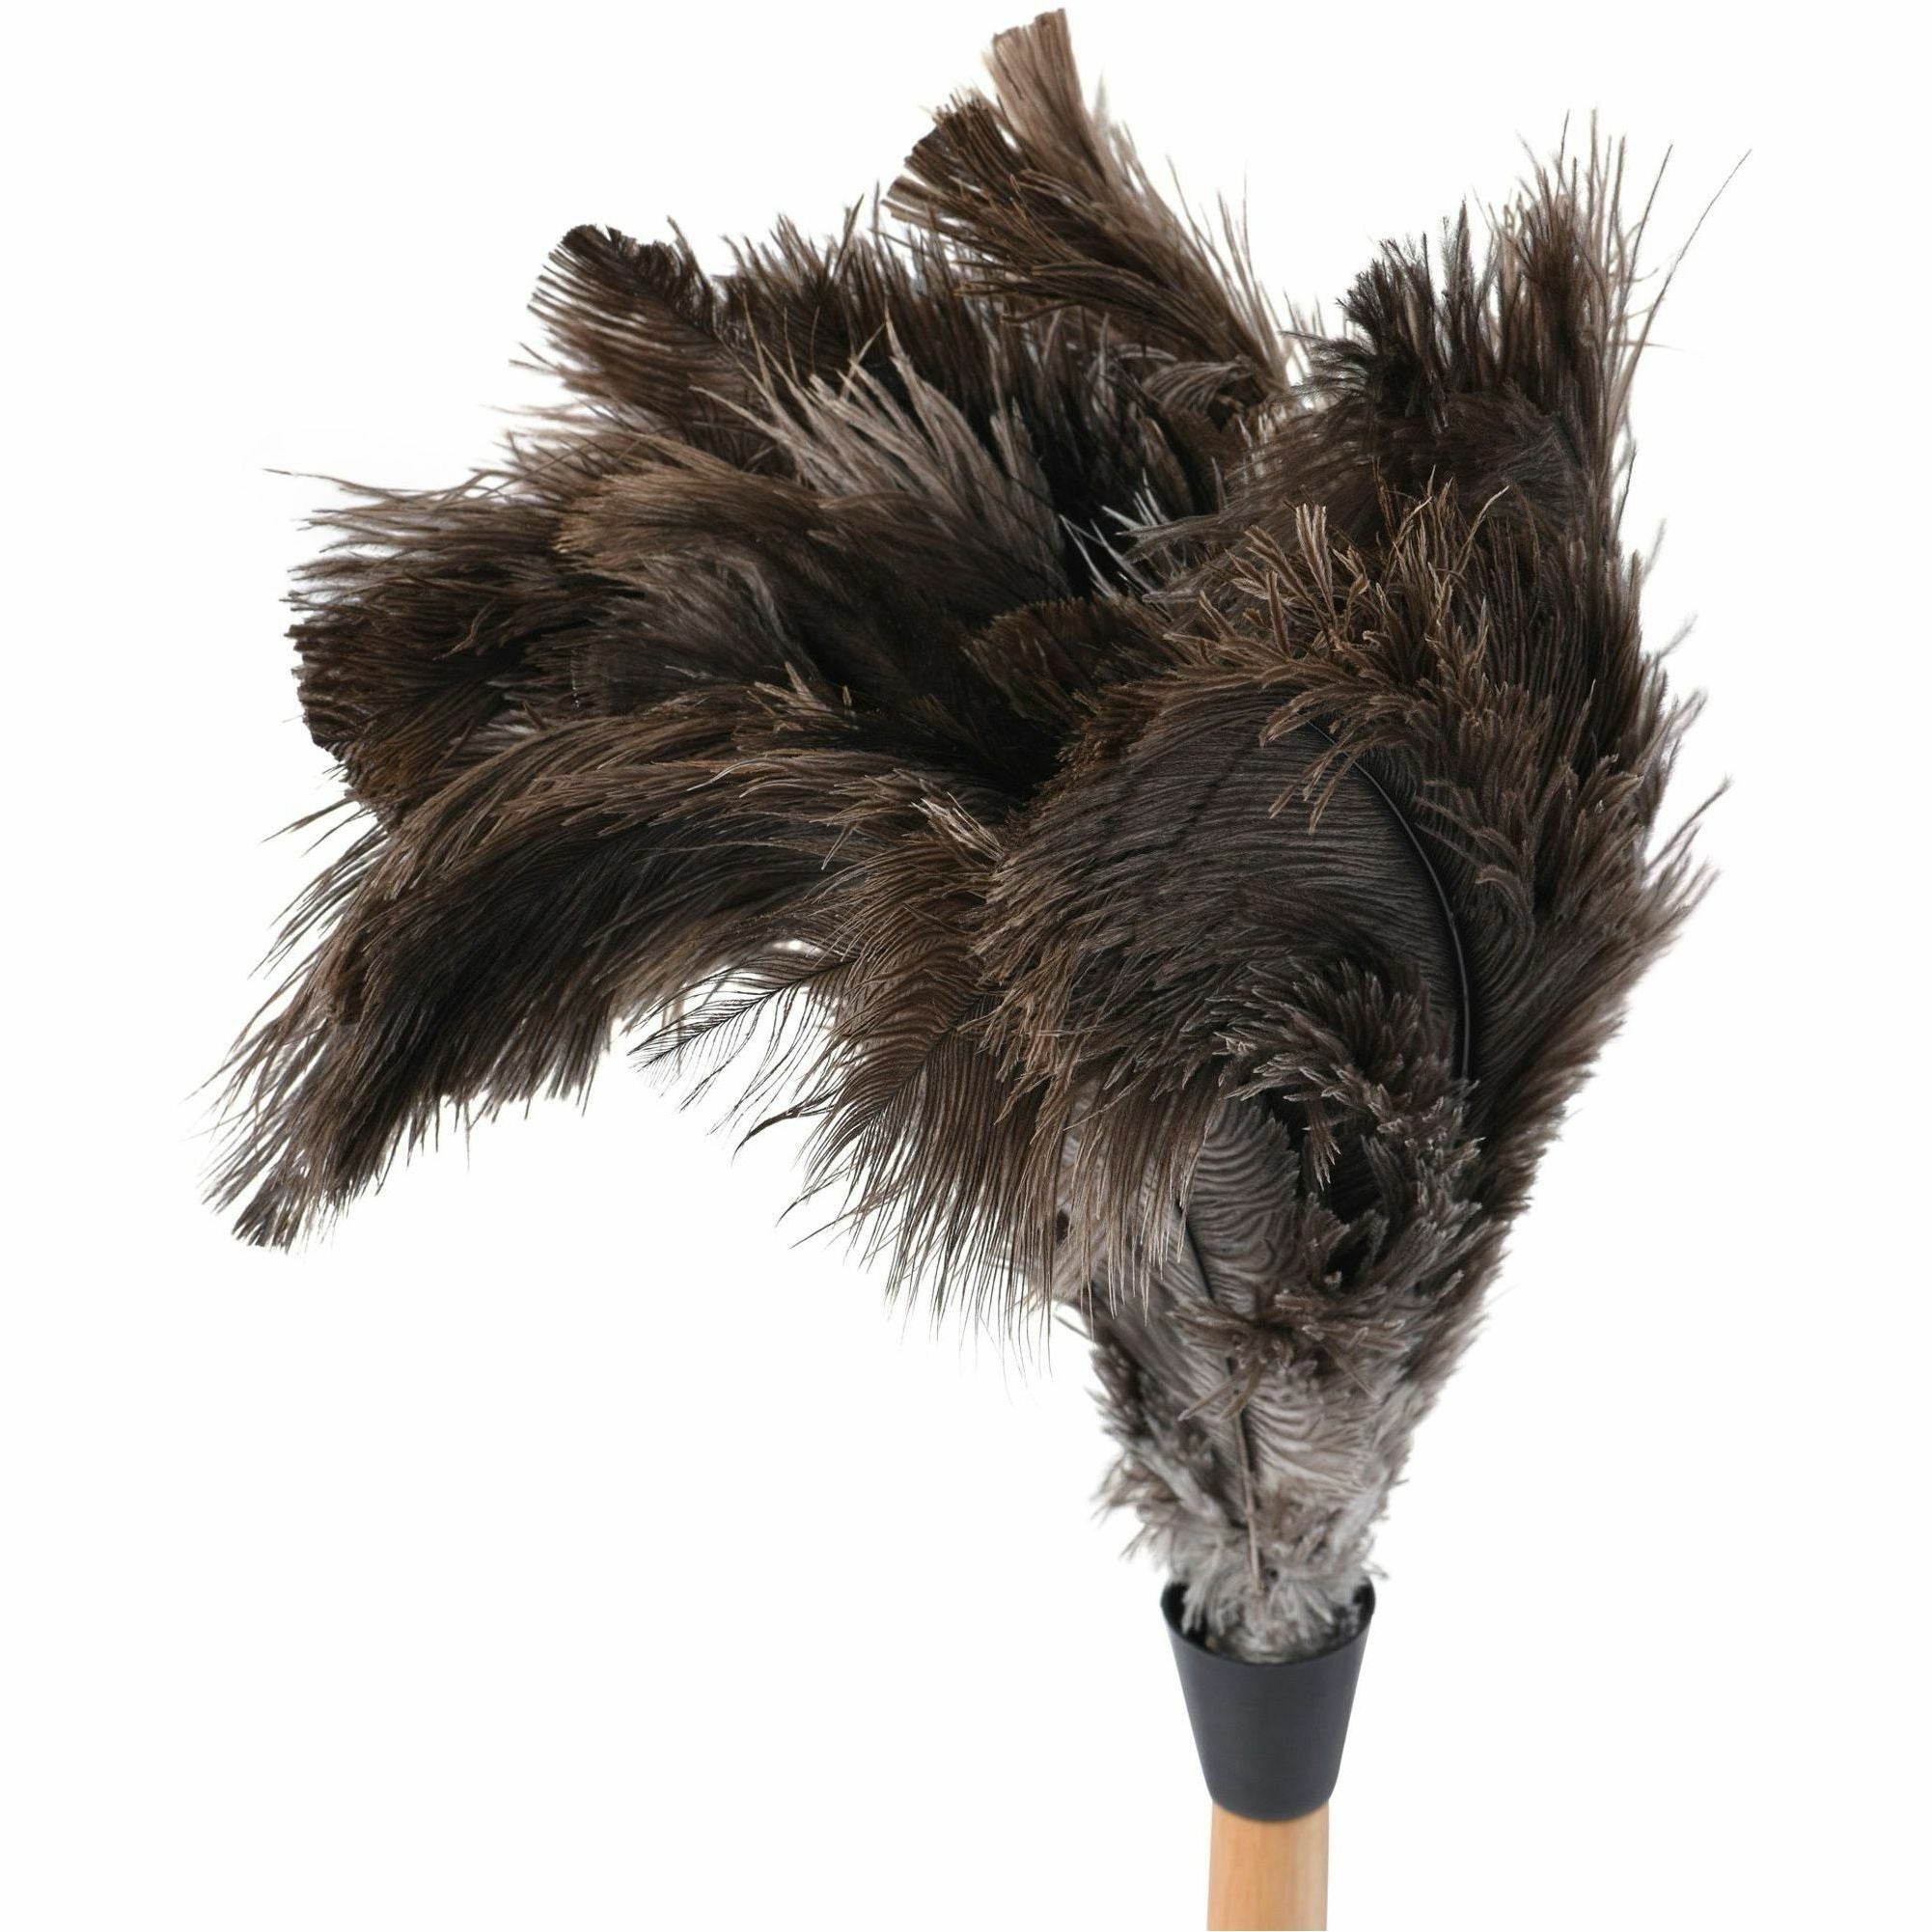 tatco-feather-duster-12-handle-length-23-overall-length-wood-handle-1-each-brown_tco41300 - 2